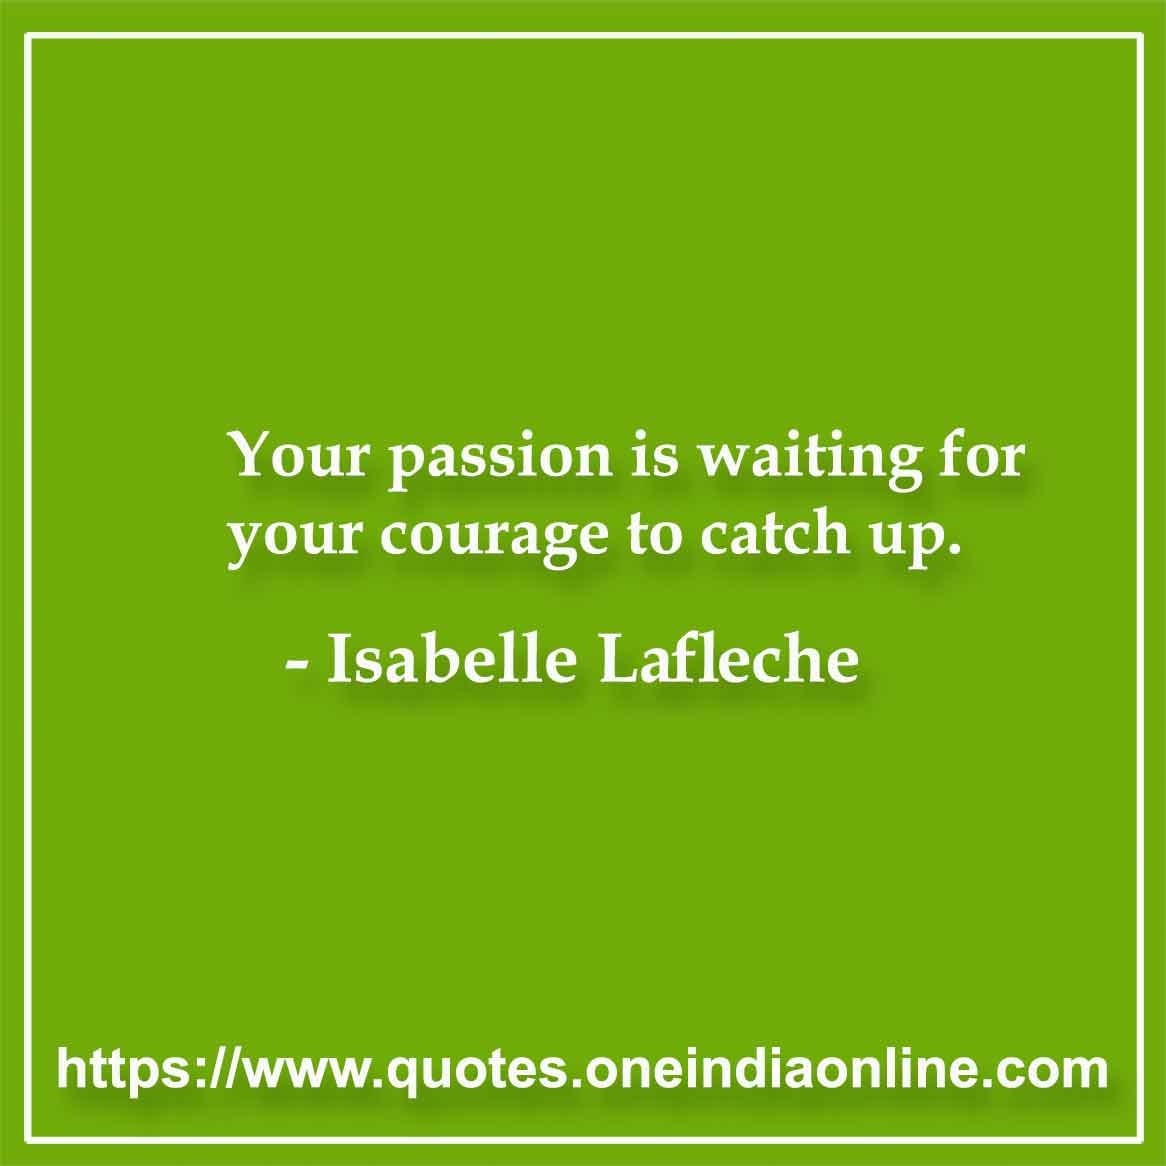 Your passion is waiting for your courage to catch up. 

-  Isabelle Lafleche